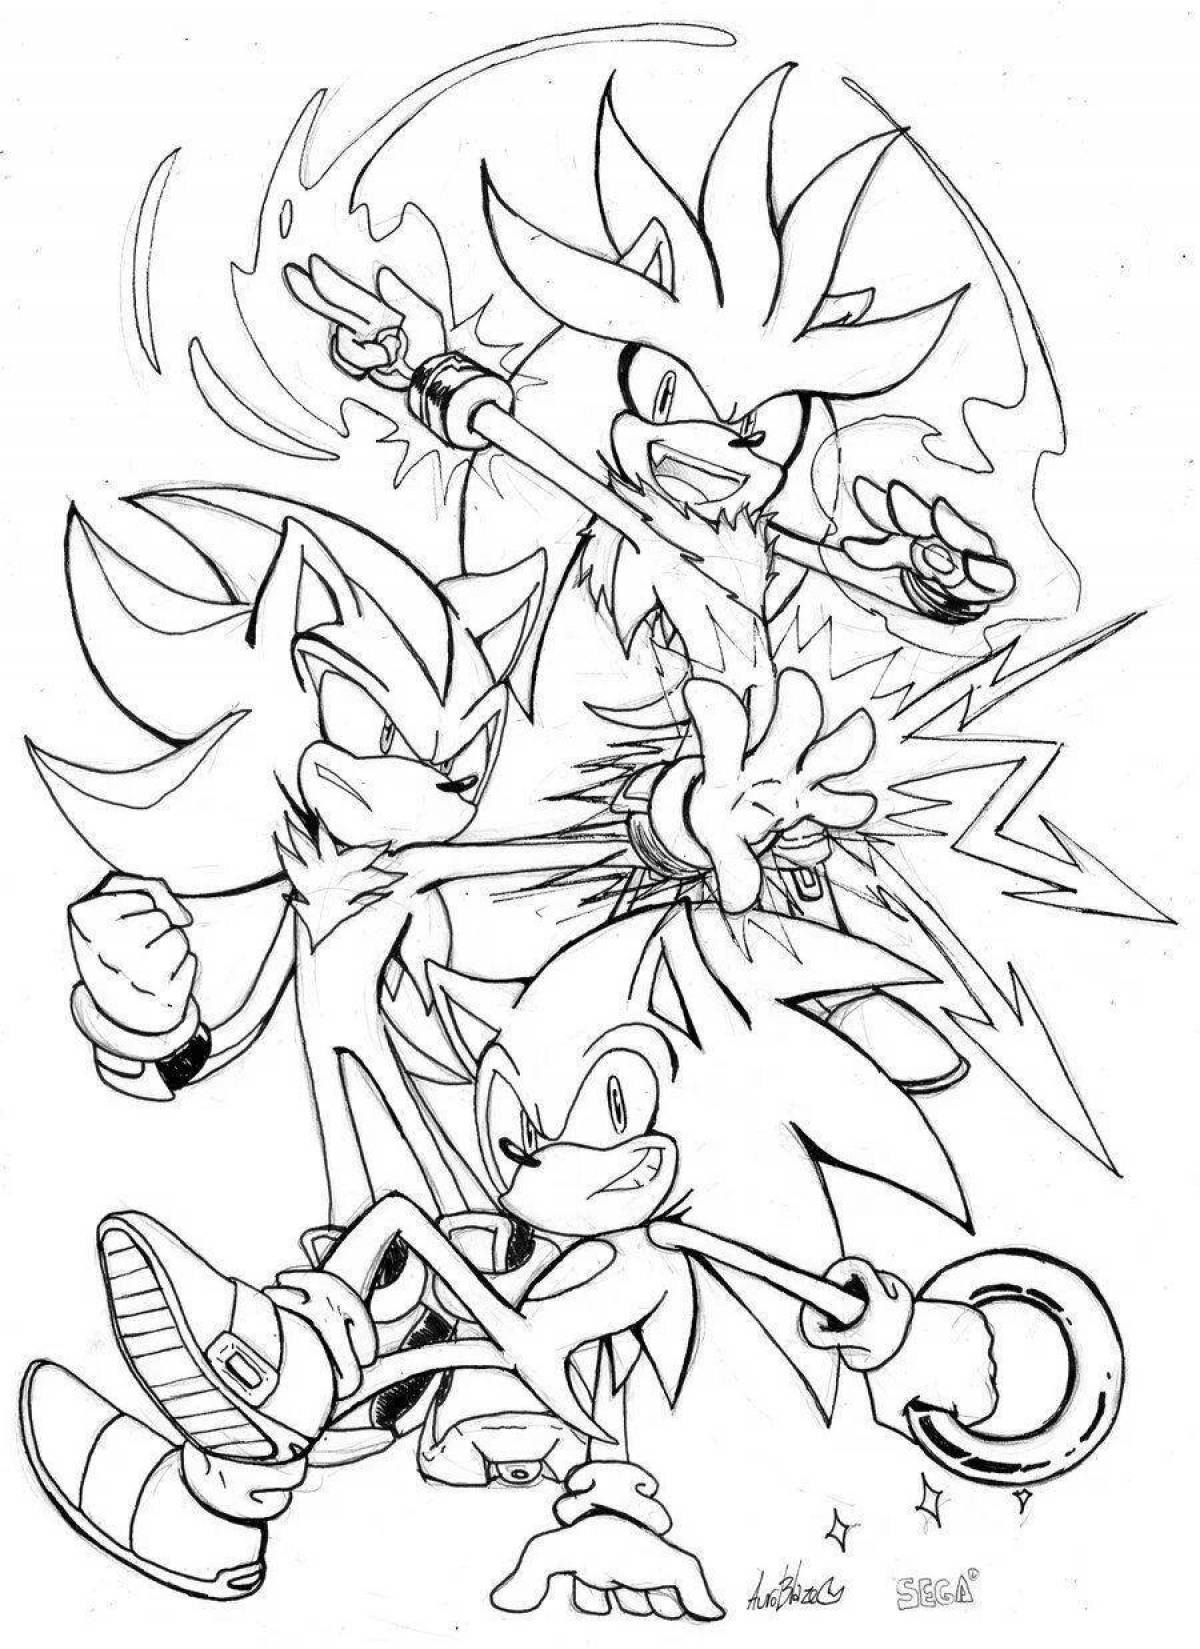 Charming coloring sonic whole team